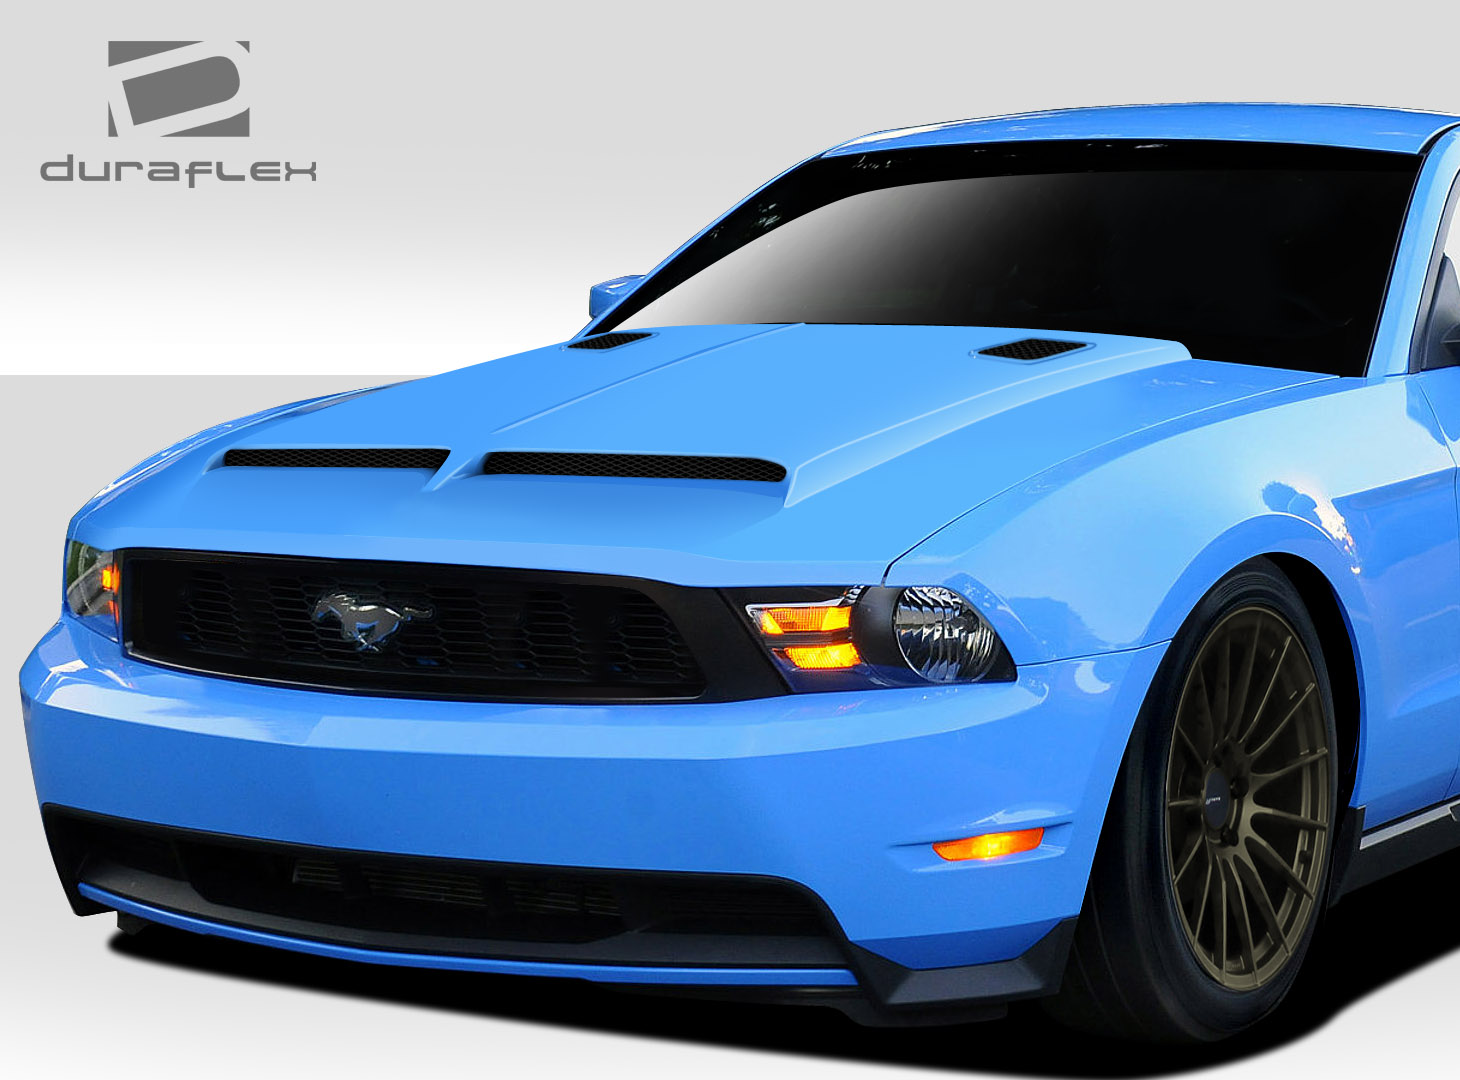 Welcome to Extreme Dimensions :: Inventory Item :: 2010-2012 Ford Mustang Duraflex ...1460 x 1080